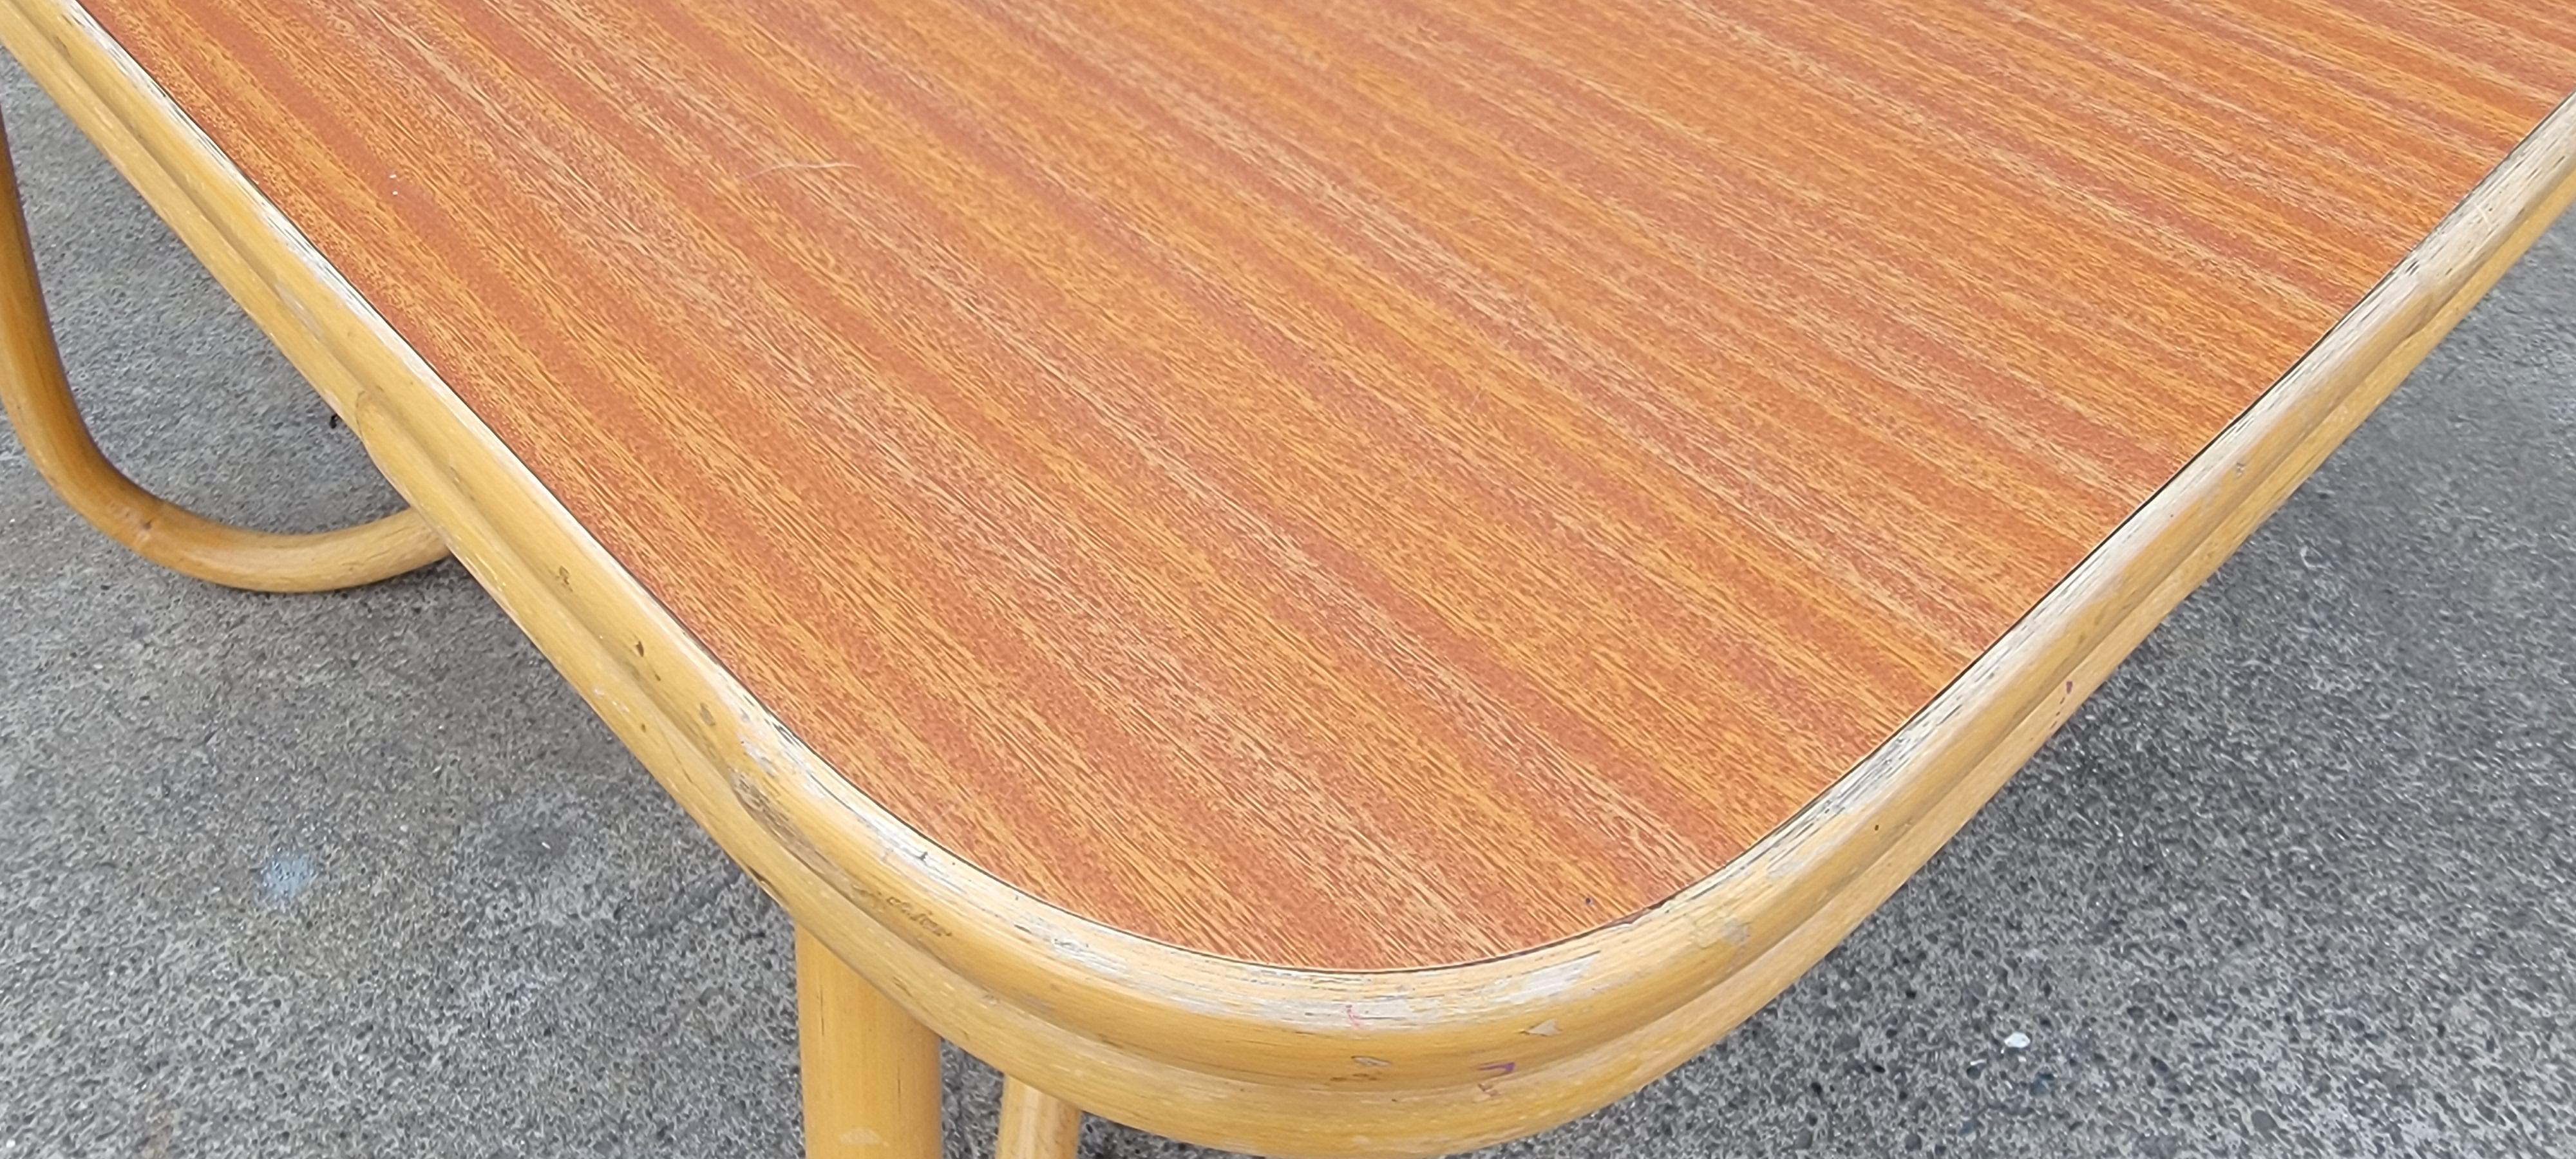 1950's Bamboo Dining Table 6